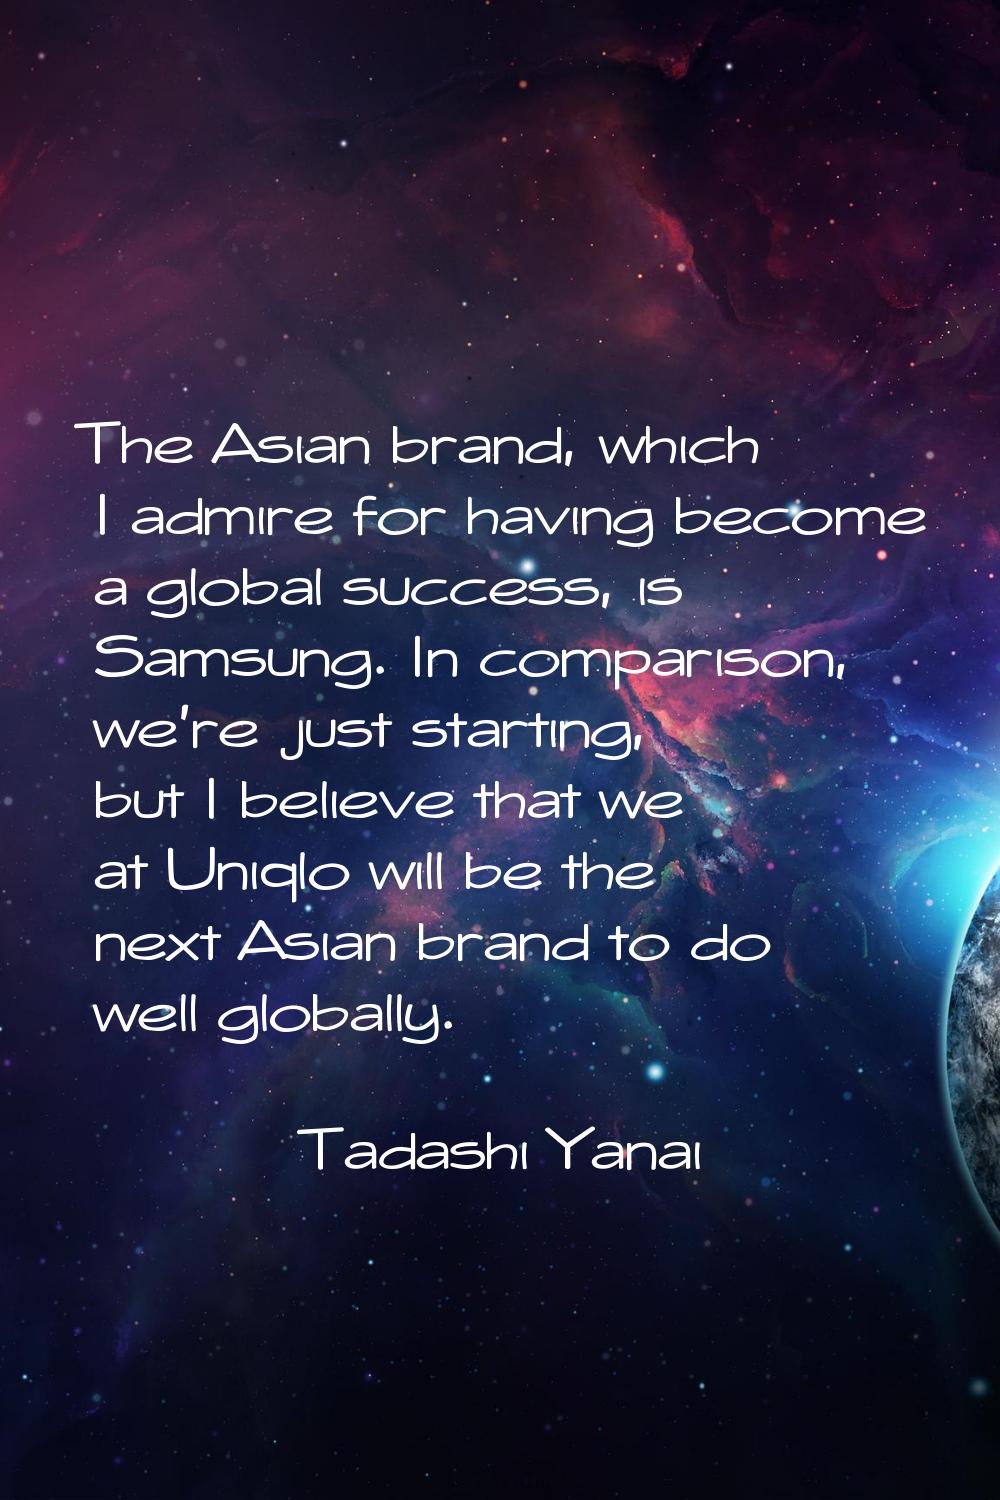 The Asian brand, which I admire for having become a global success, is Samsung. In comparison, we'r